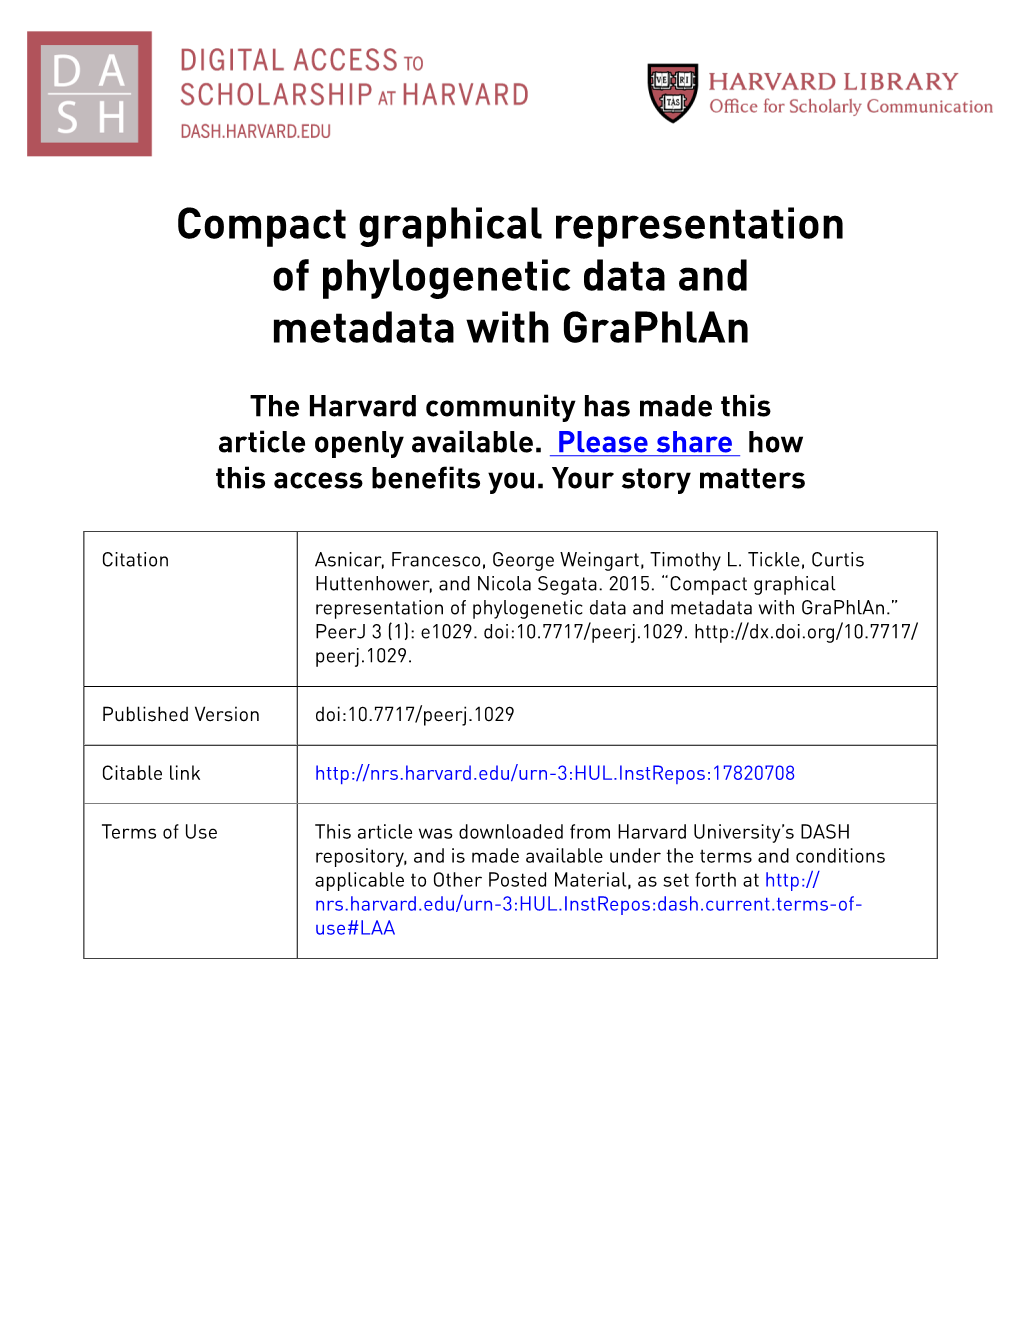 Compact Graphical Representation of Phylogenetic Data and Metadata with Graphlan